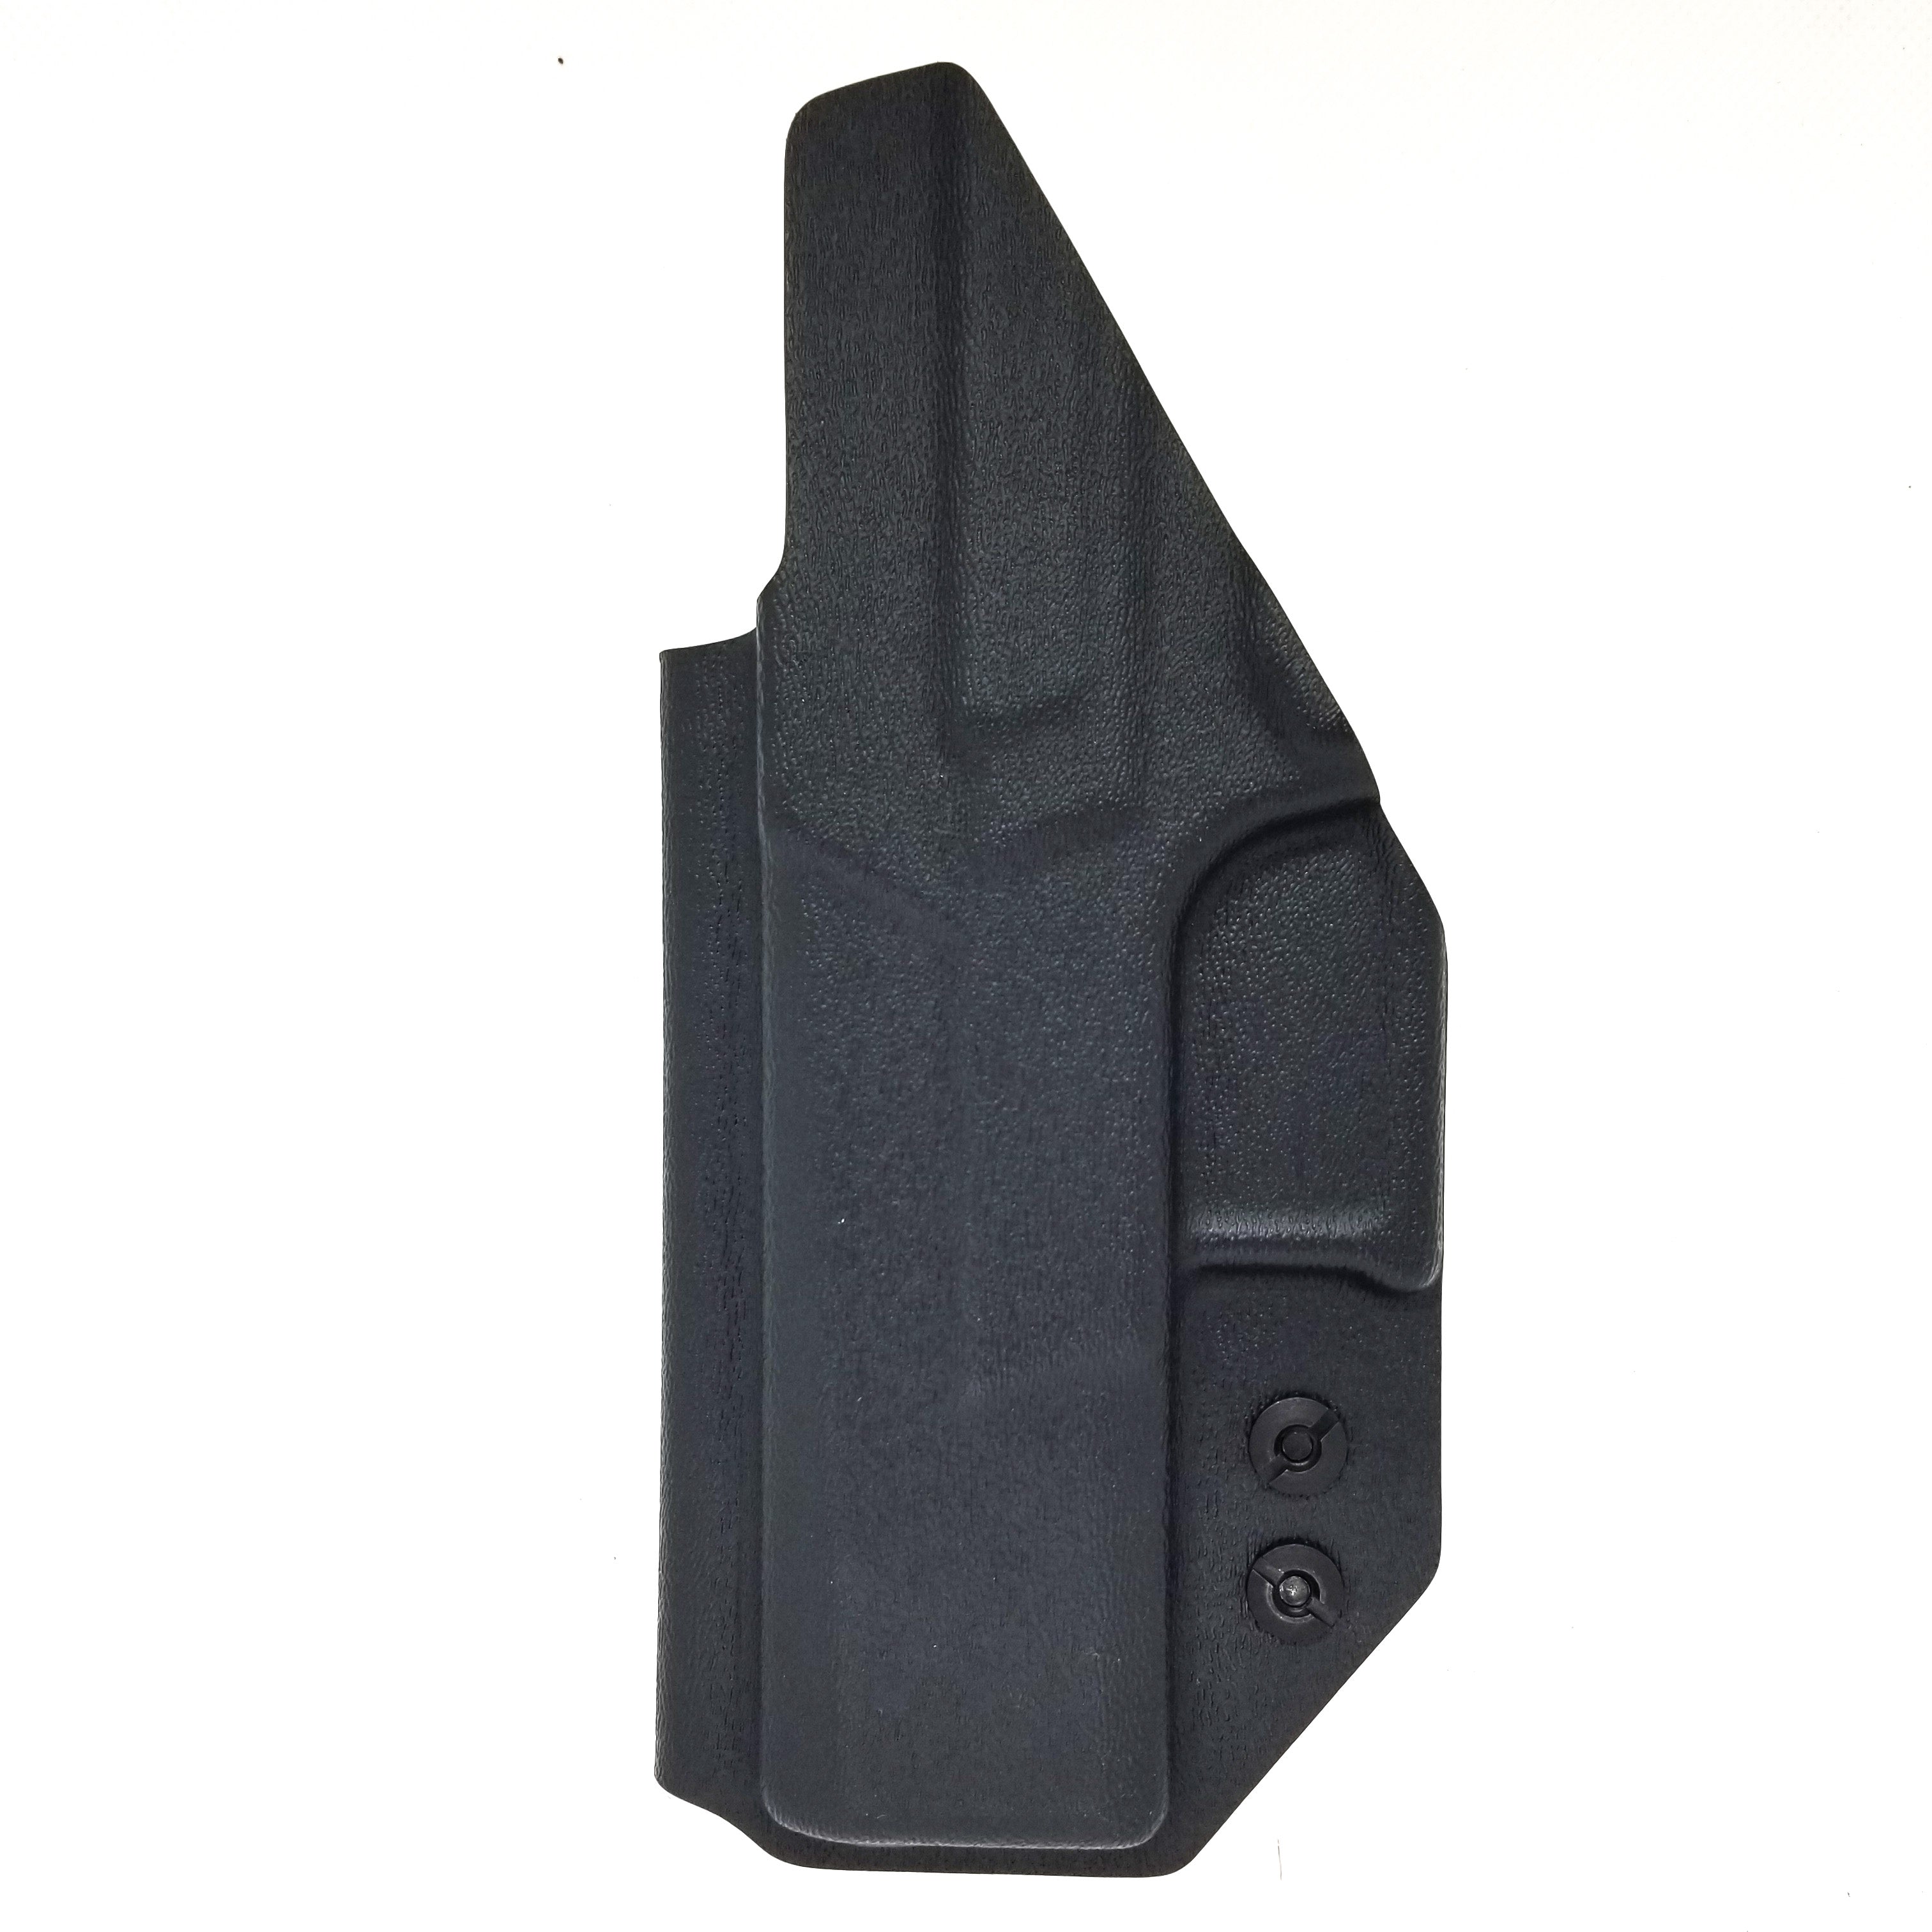 Inside Waistband Holster designed to fit the CZ P-10 with adjustable retention, adjustable cant and a high sweat guard as standard options. FOMI 1.5" Belt attachment with an optional Modwing to reduce firearm printing. IWB 1 1/2" Belt attachment C P10 C P 10 C P10C CZ-USA